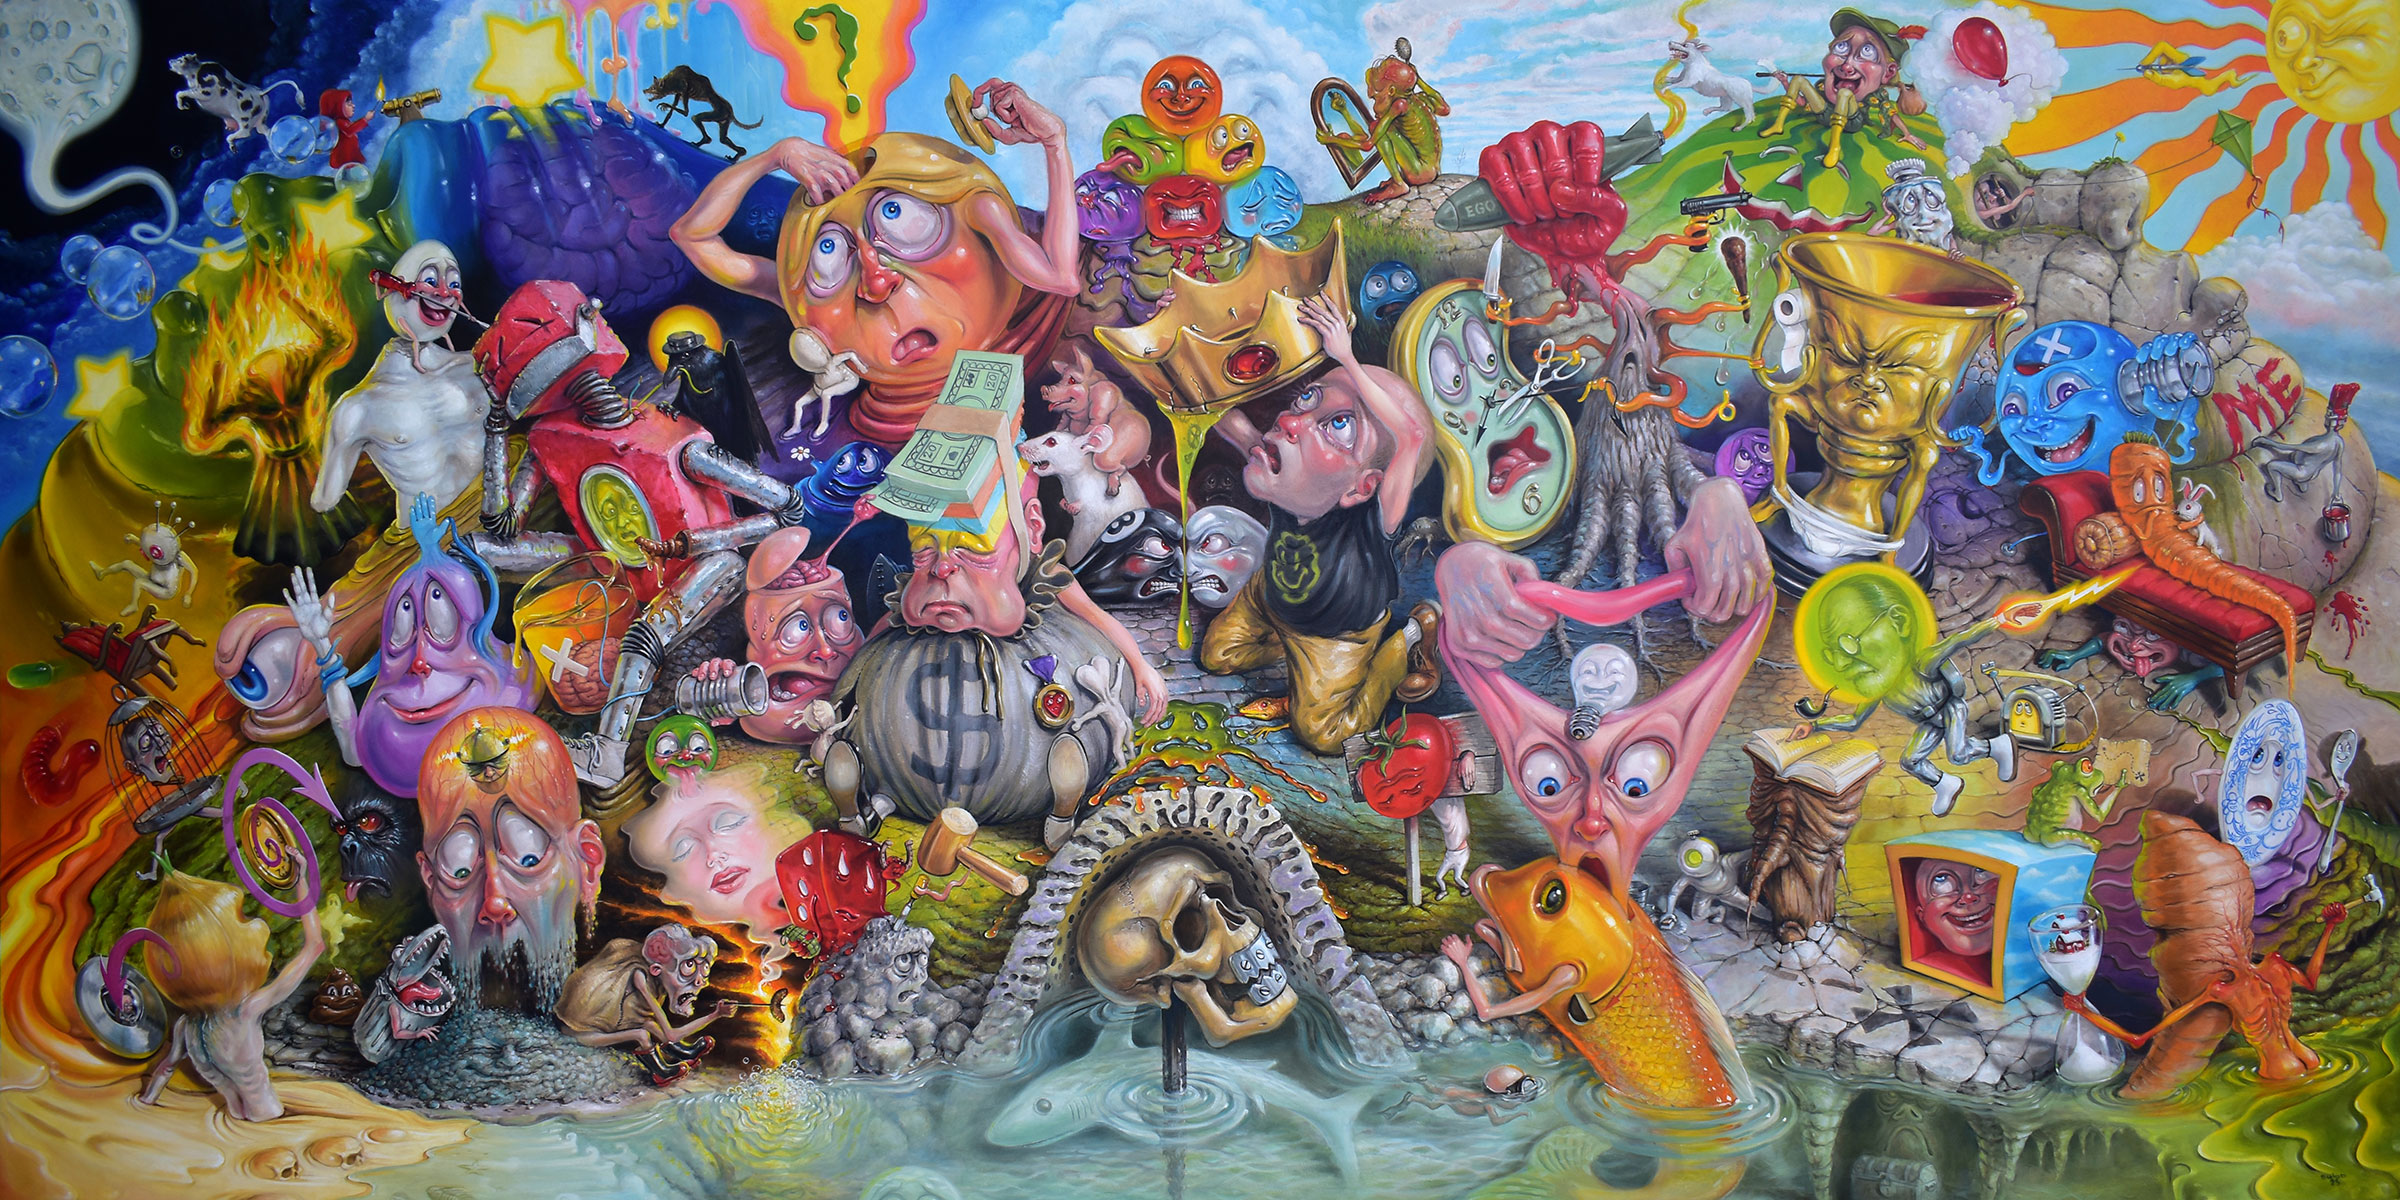 pop surrealism lowbrow painting depicting themes centred on the ego